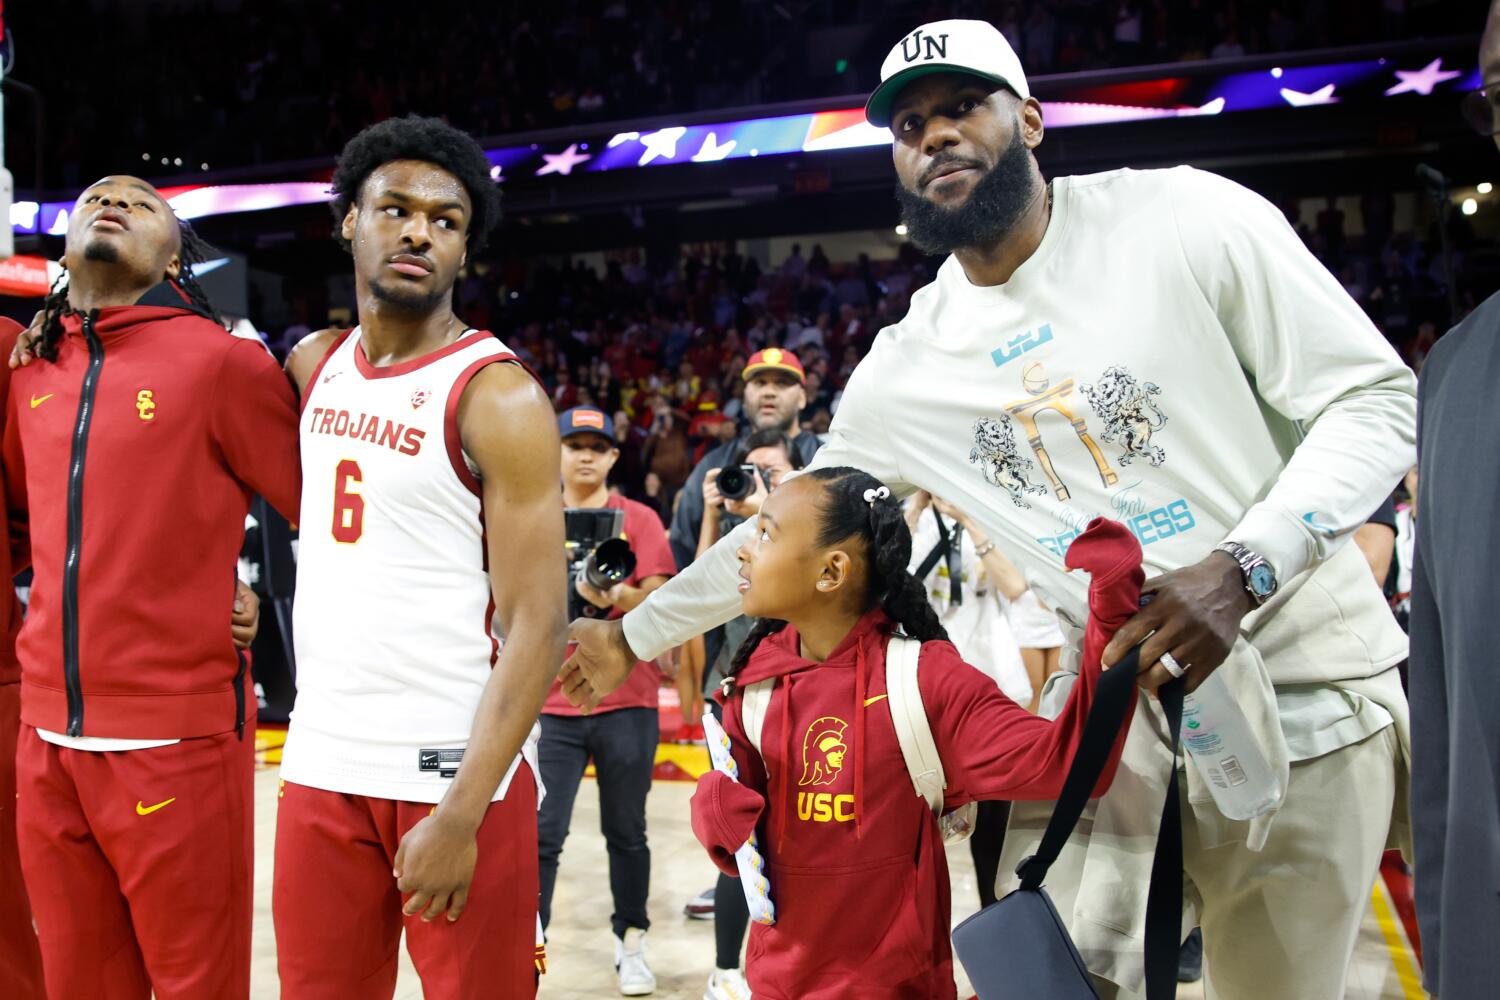 LeBron James' message to media over son Bronny's NBA future: 'Let the kid be a kid'